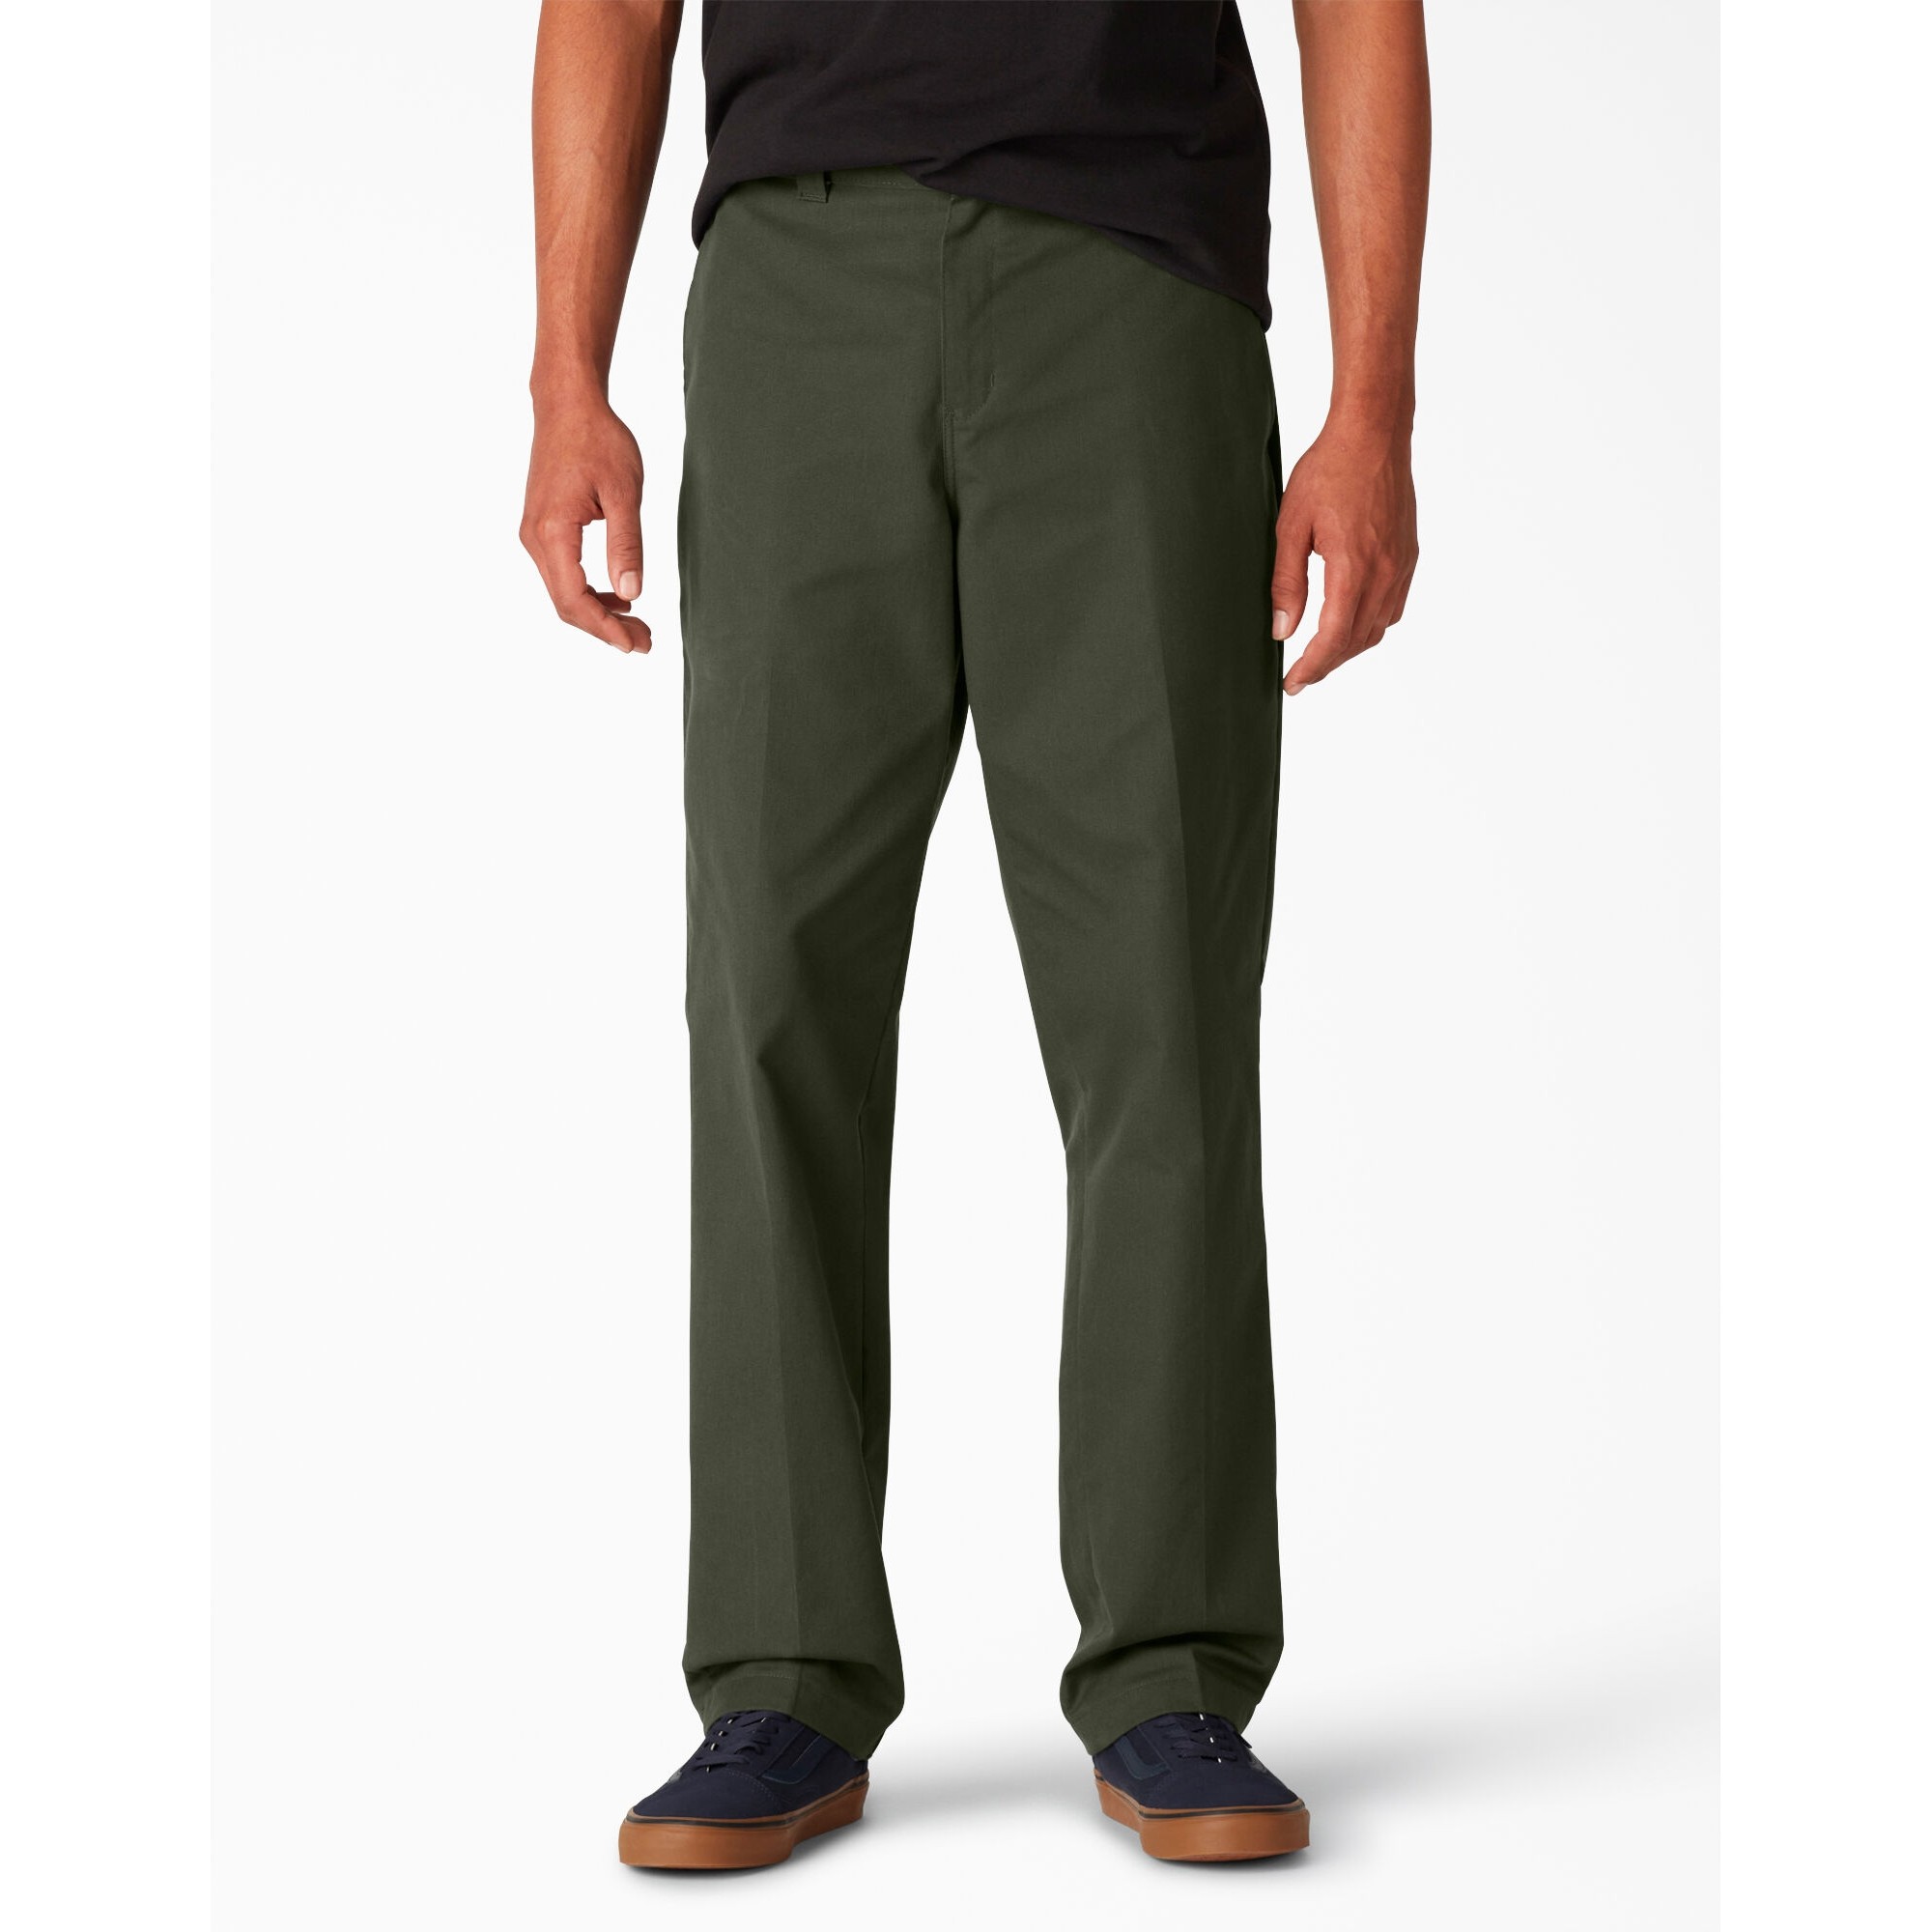 https://www.companybe.com/CalSurf/product_photos/rd_images/rd_dickies-slim-straight-work-pant-olive-green.jpg